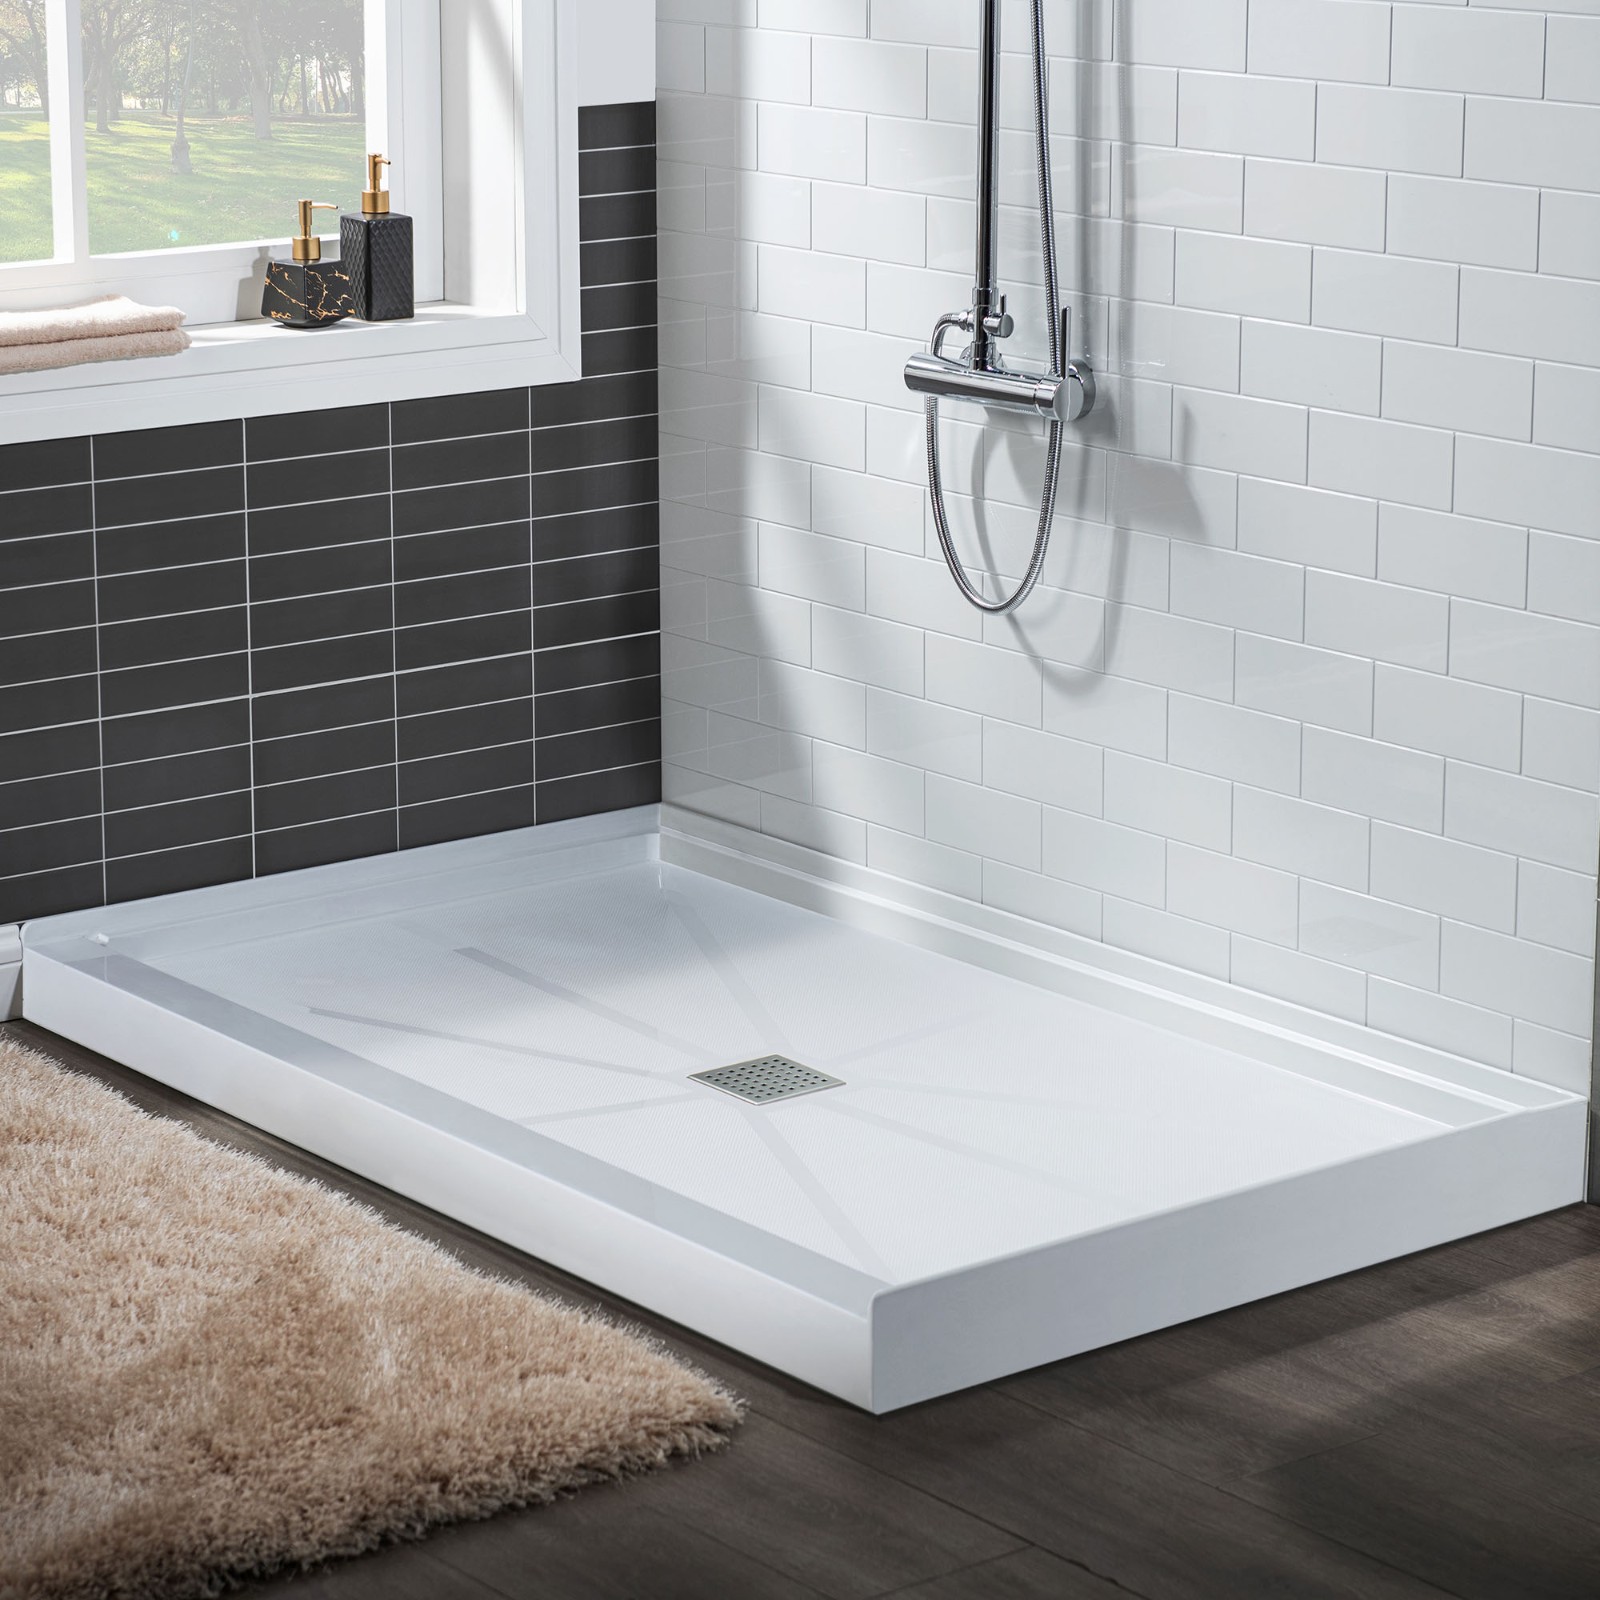  WOODBRIDGE SBR6032-1000C Solid Surface Shower Base with Recessed Trench Side Including Stainless Steel Linear Cover, 60